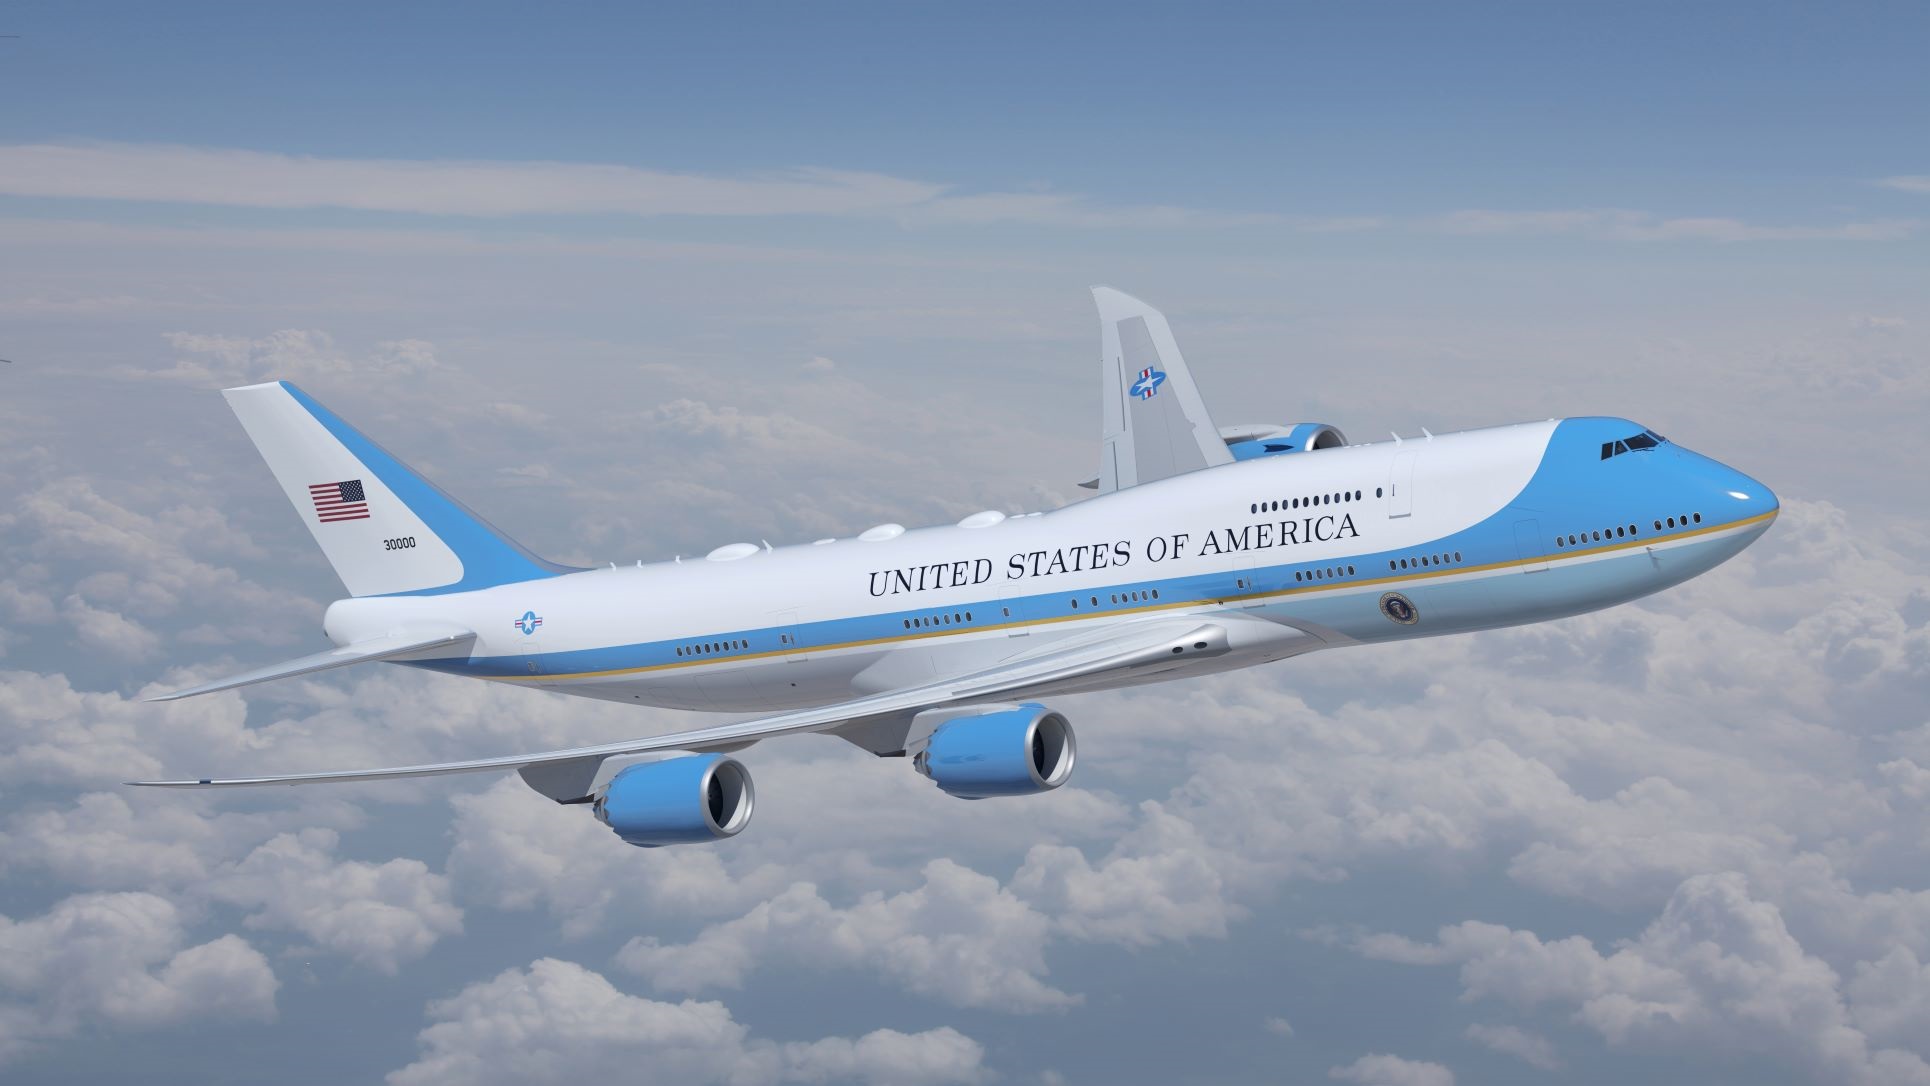 New Air Force One Livery Revealed